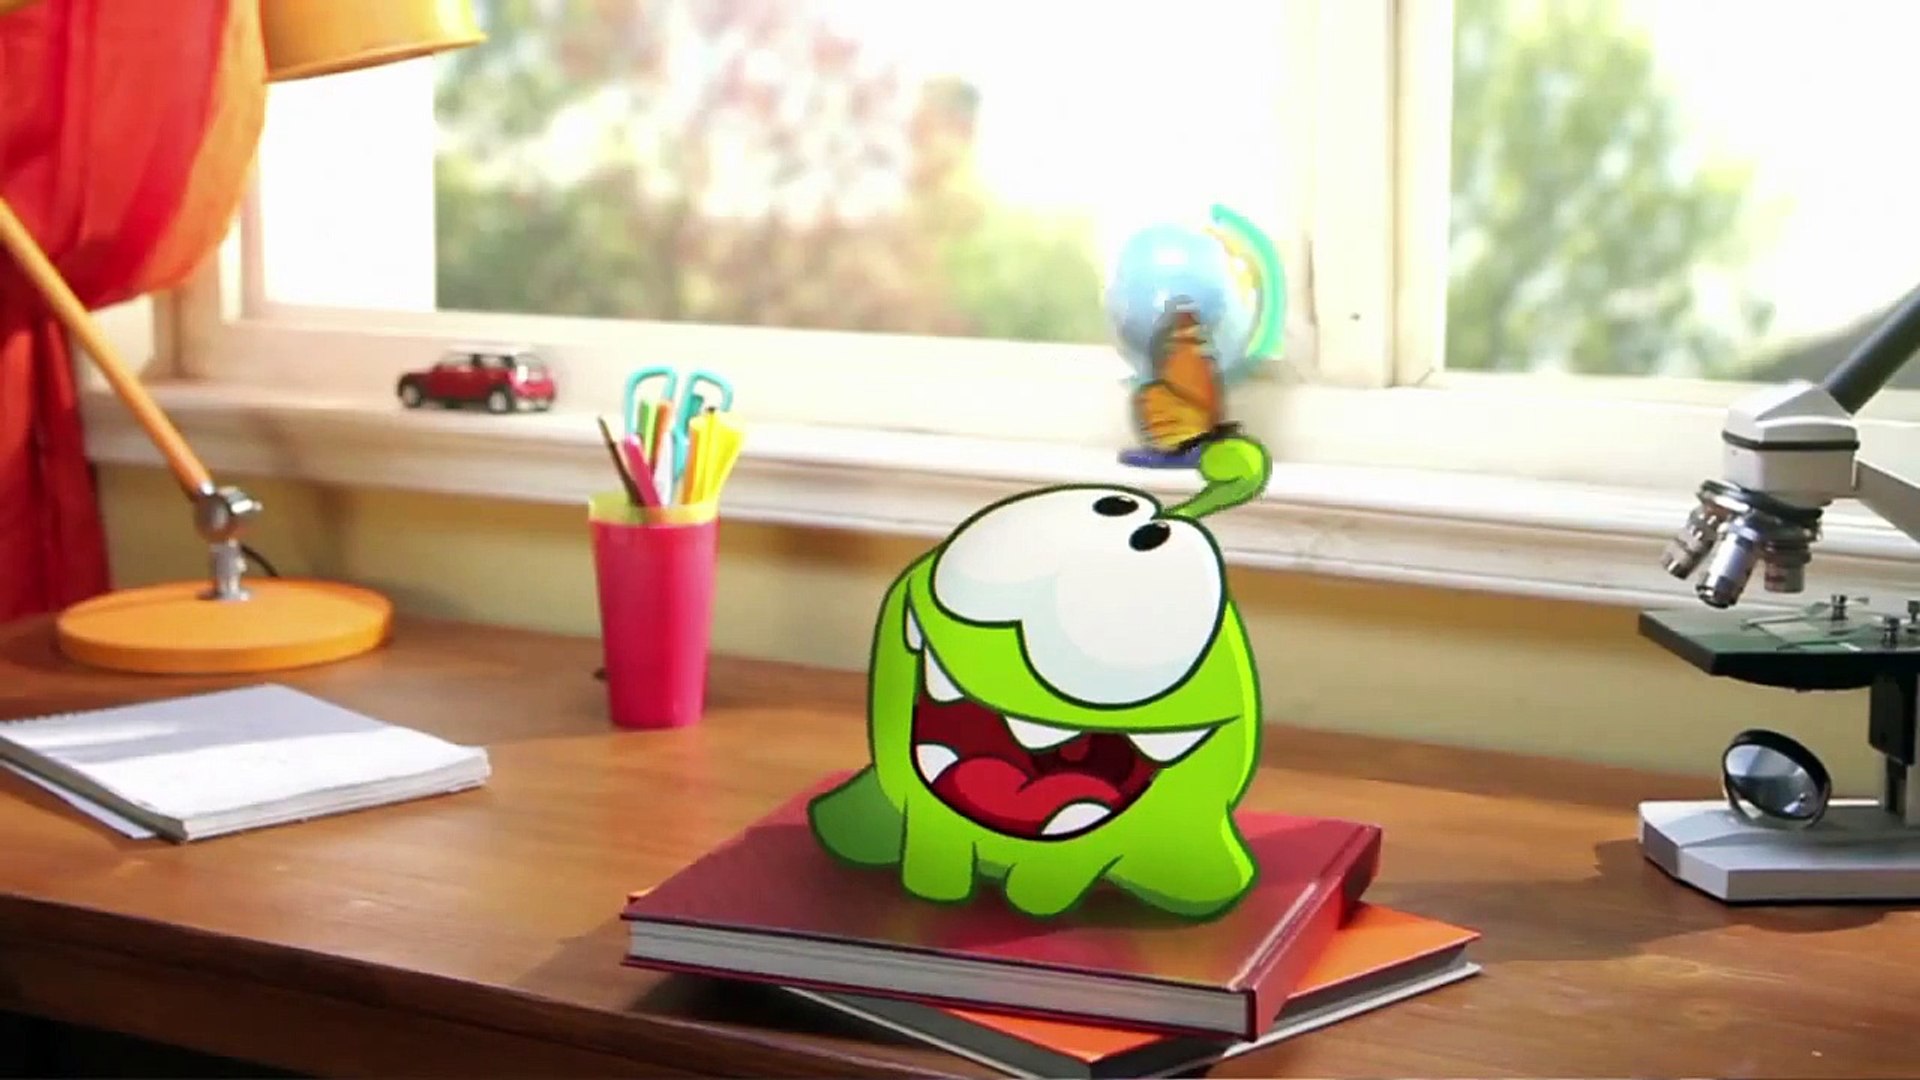 Cut the Rope 3  Official Trailer - video Dailymotion